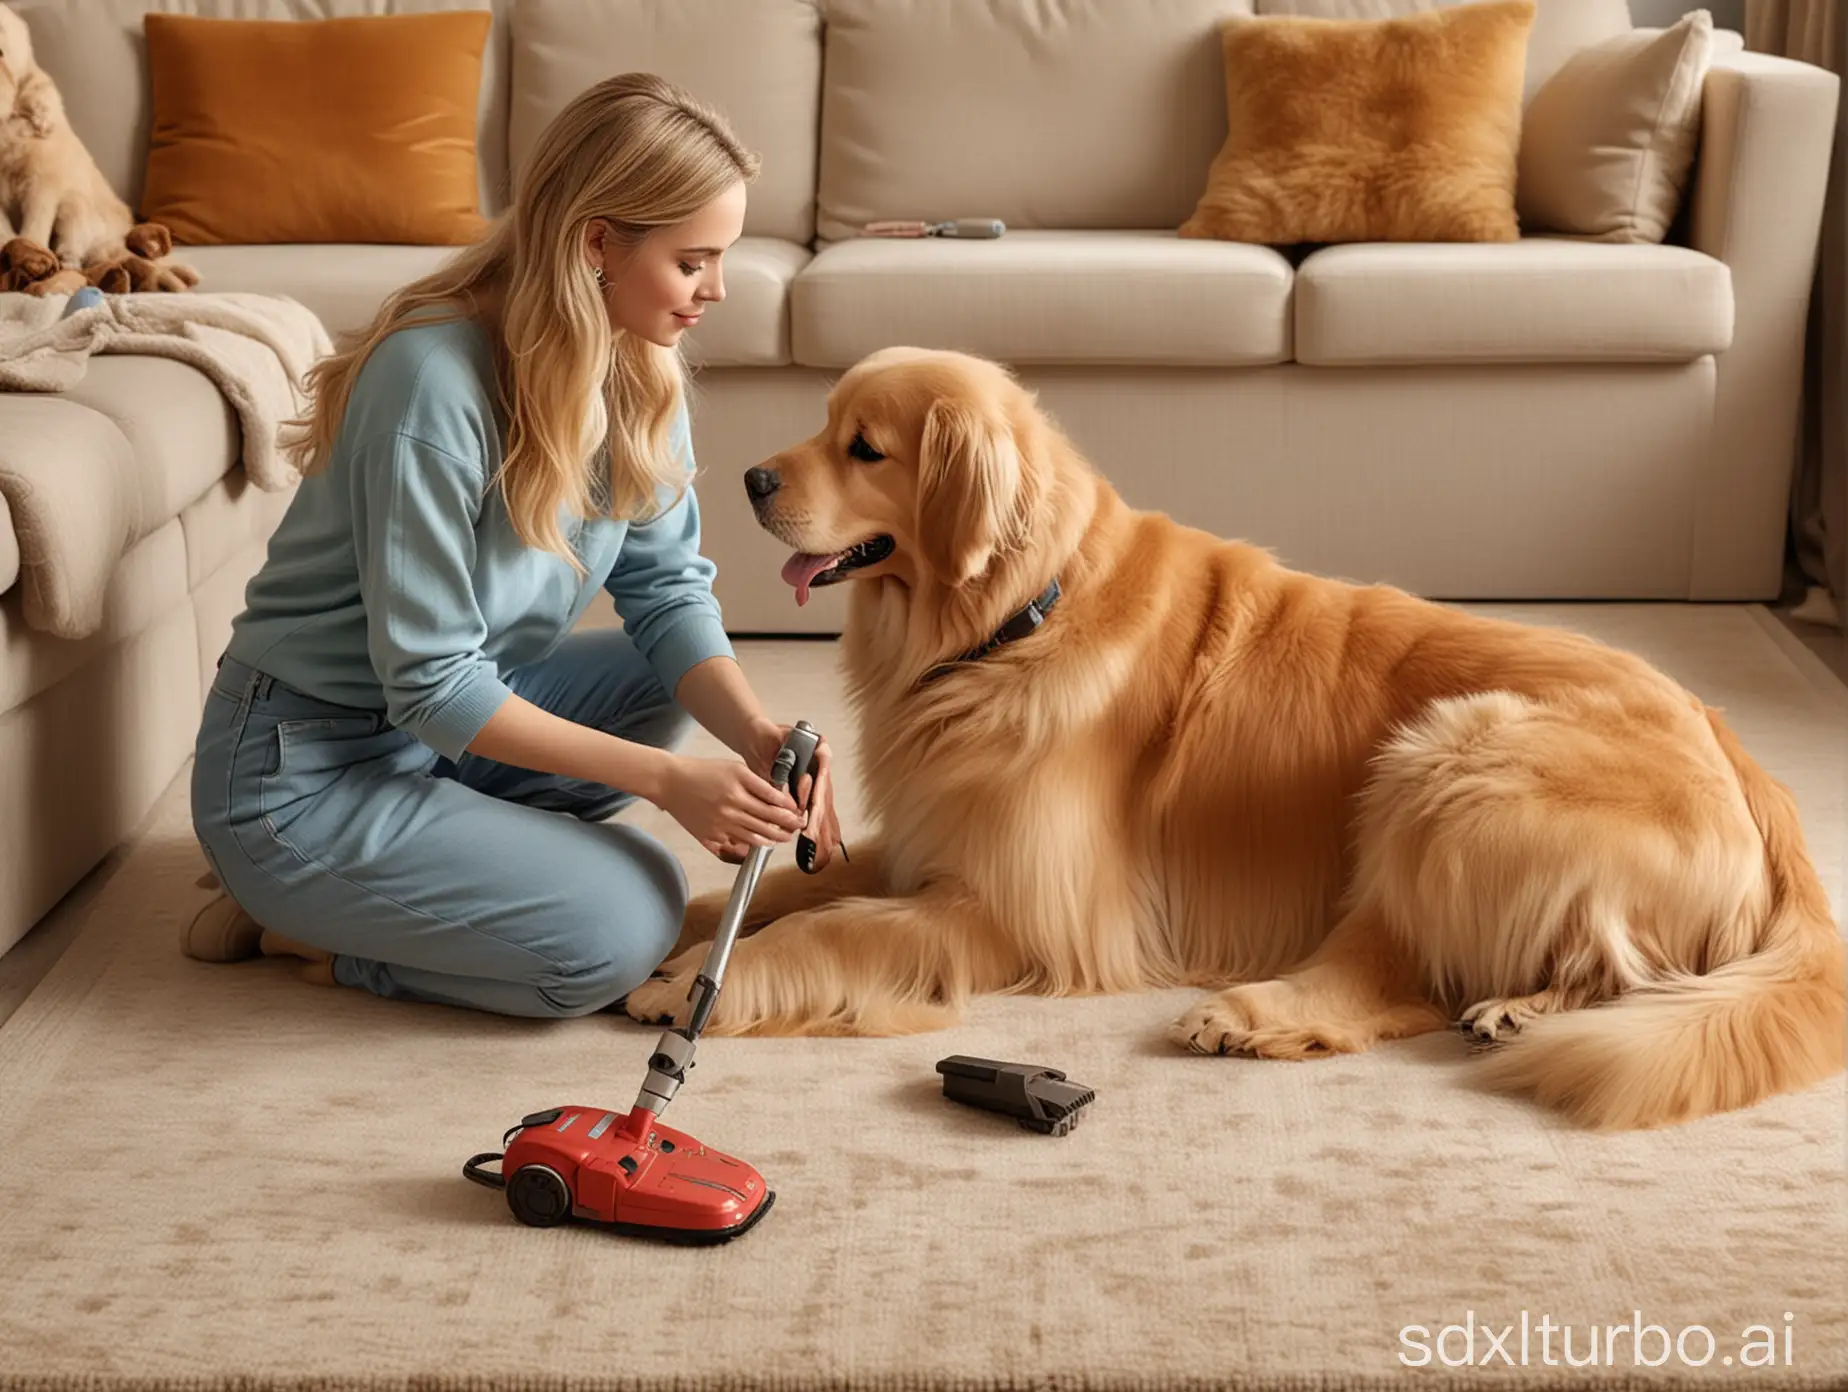 Pet-Grooming-Session-Foreign-Woman-Grooming-Realistic-Golden-Retriever-in-Living-Room